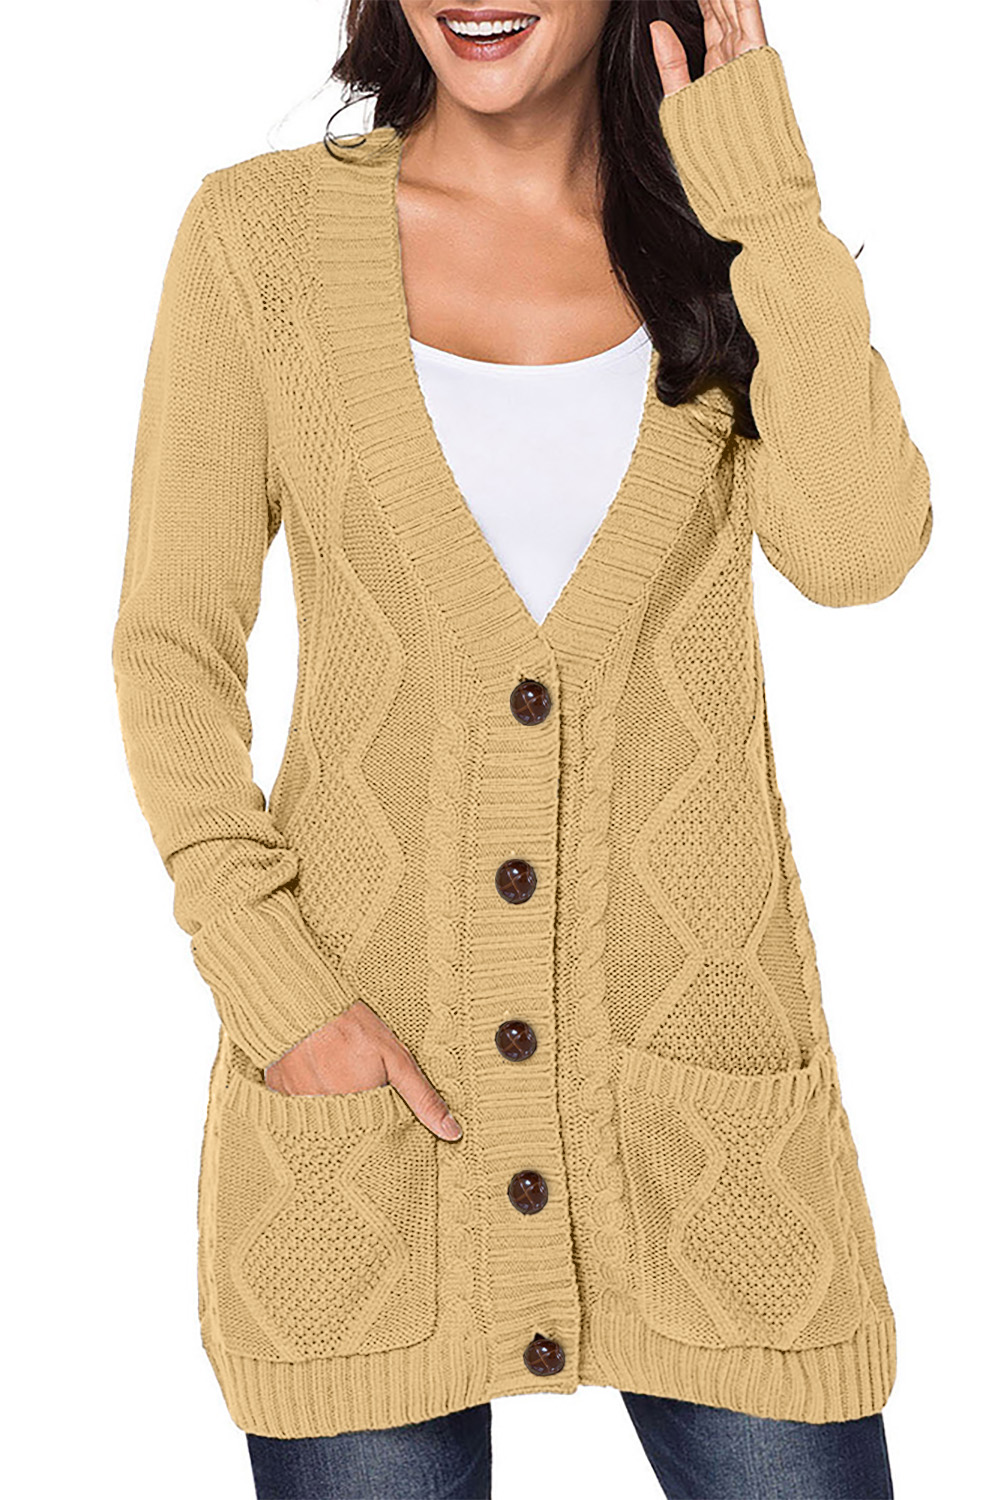 Hanna Women Front Button Down Long Sleeve Cardigan Sweater with Pockets